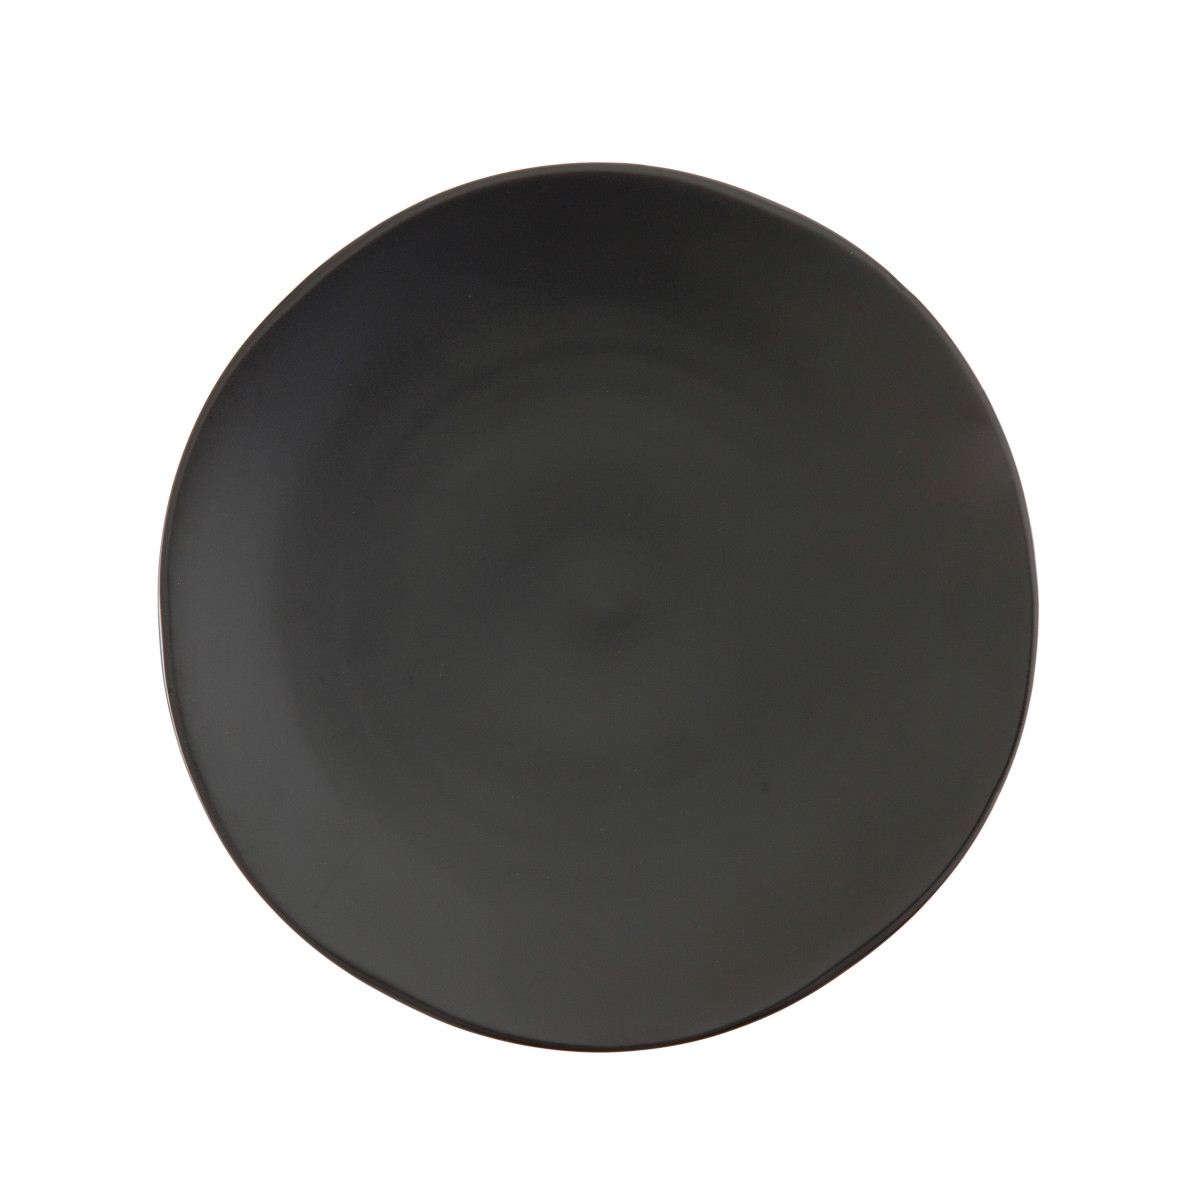 Heirloom 12" Charger Plate, Charcoal, Set of 4